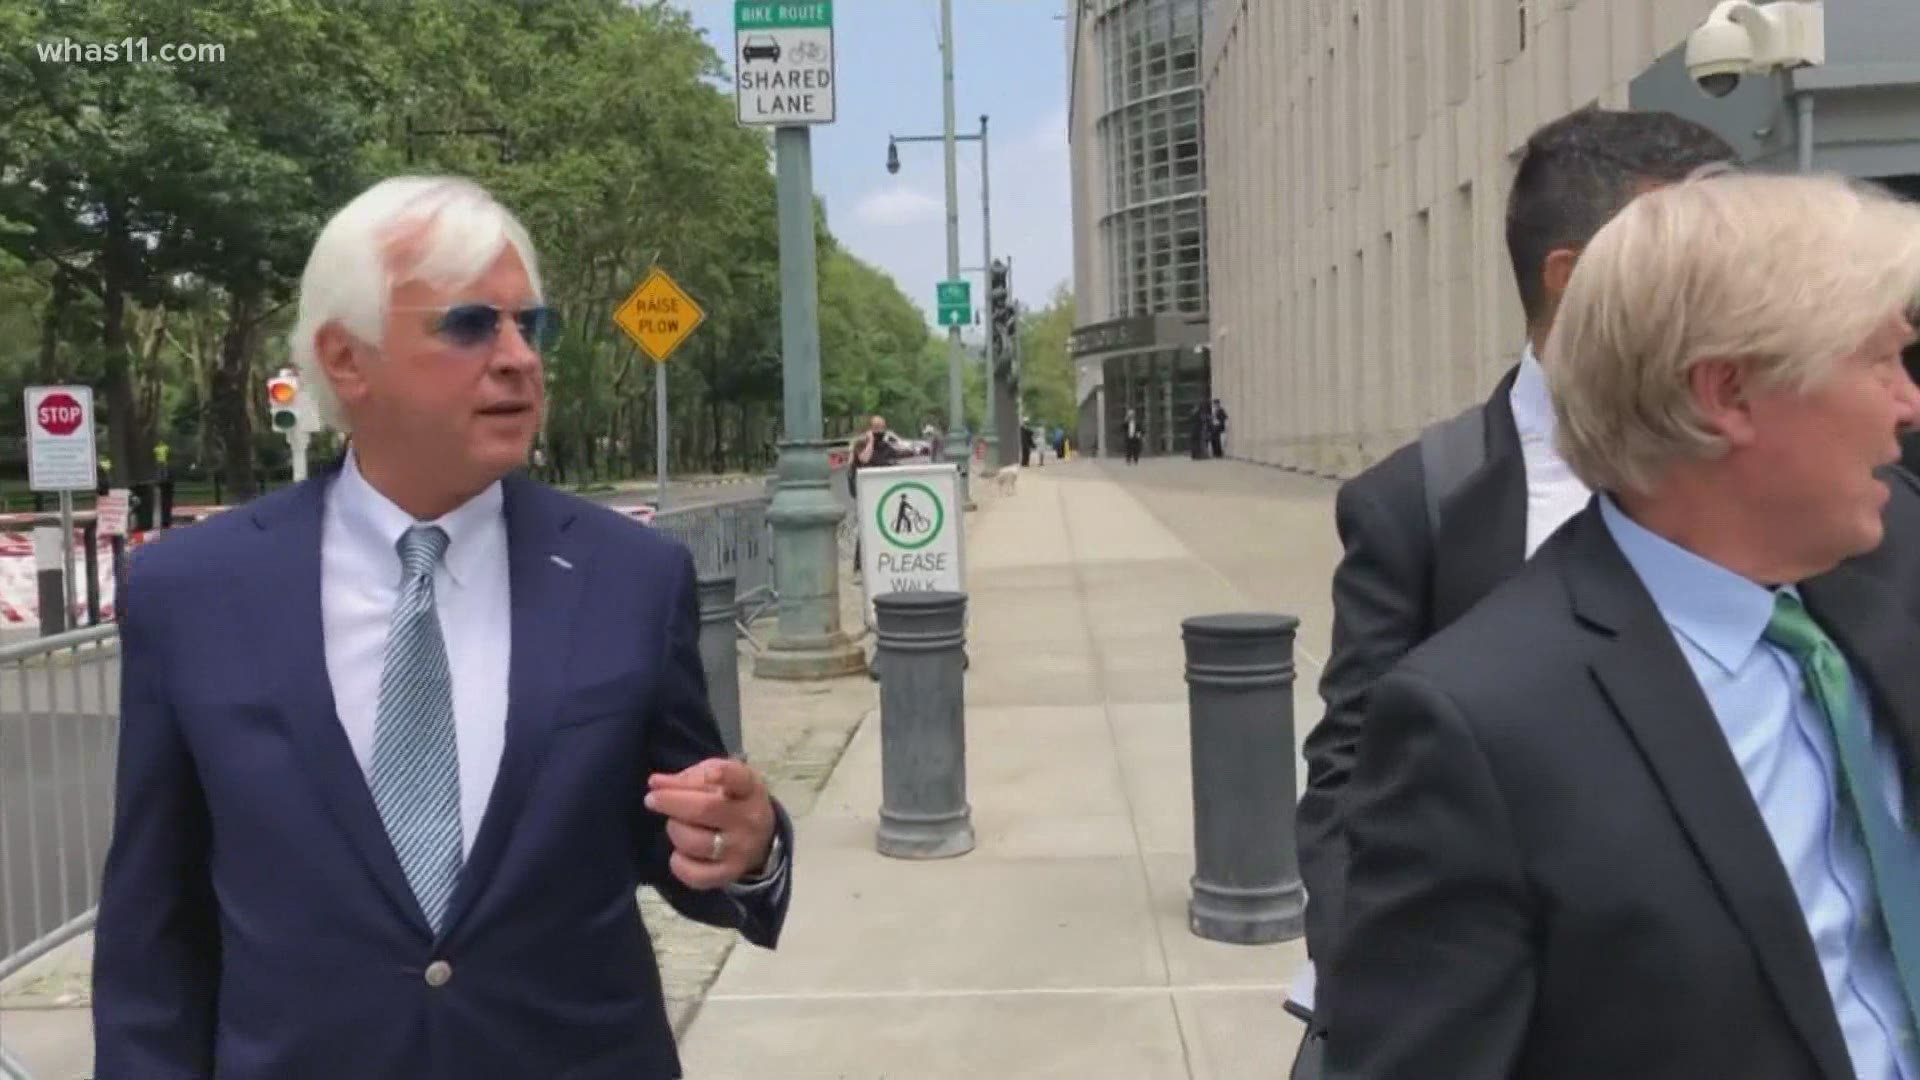 Baffert continues his argument that the NYRA suspended him without due process.